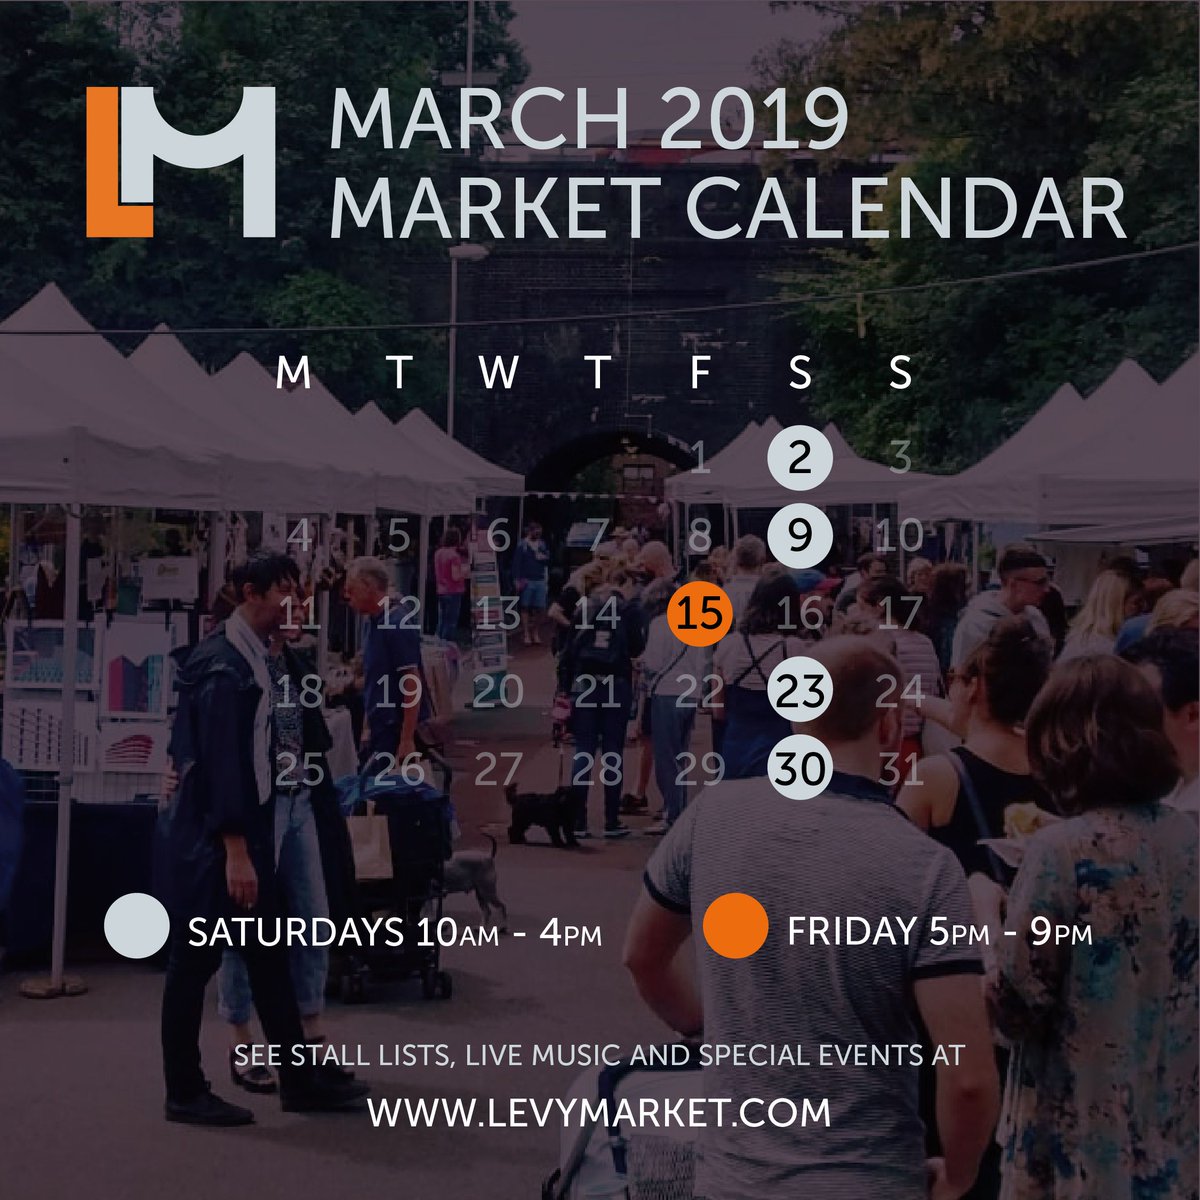 🚨 MARCH dates for Levy Market! 🚨 We're back soon with amazing street food, live music, handmade goodies, vintage, plants, kids fun and so much more, there's something new every week!